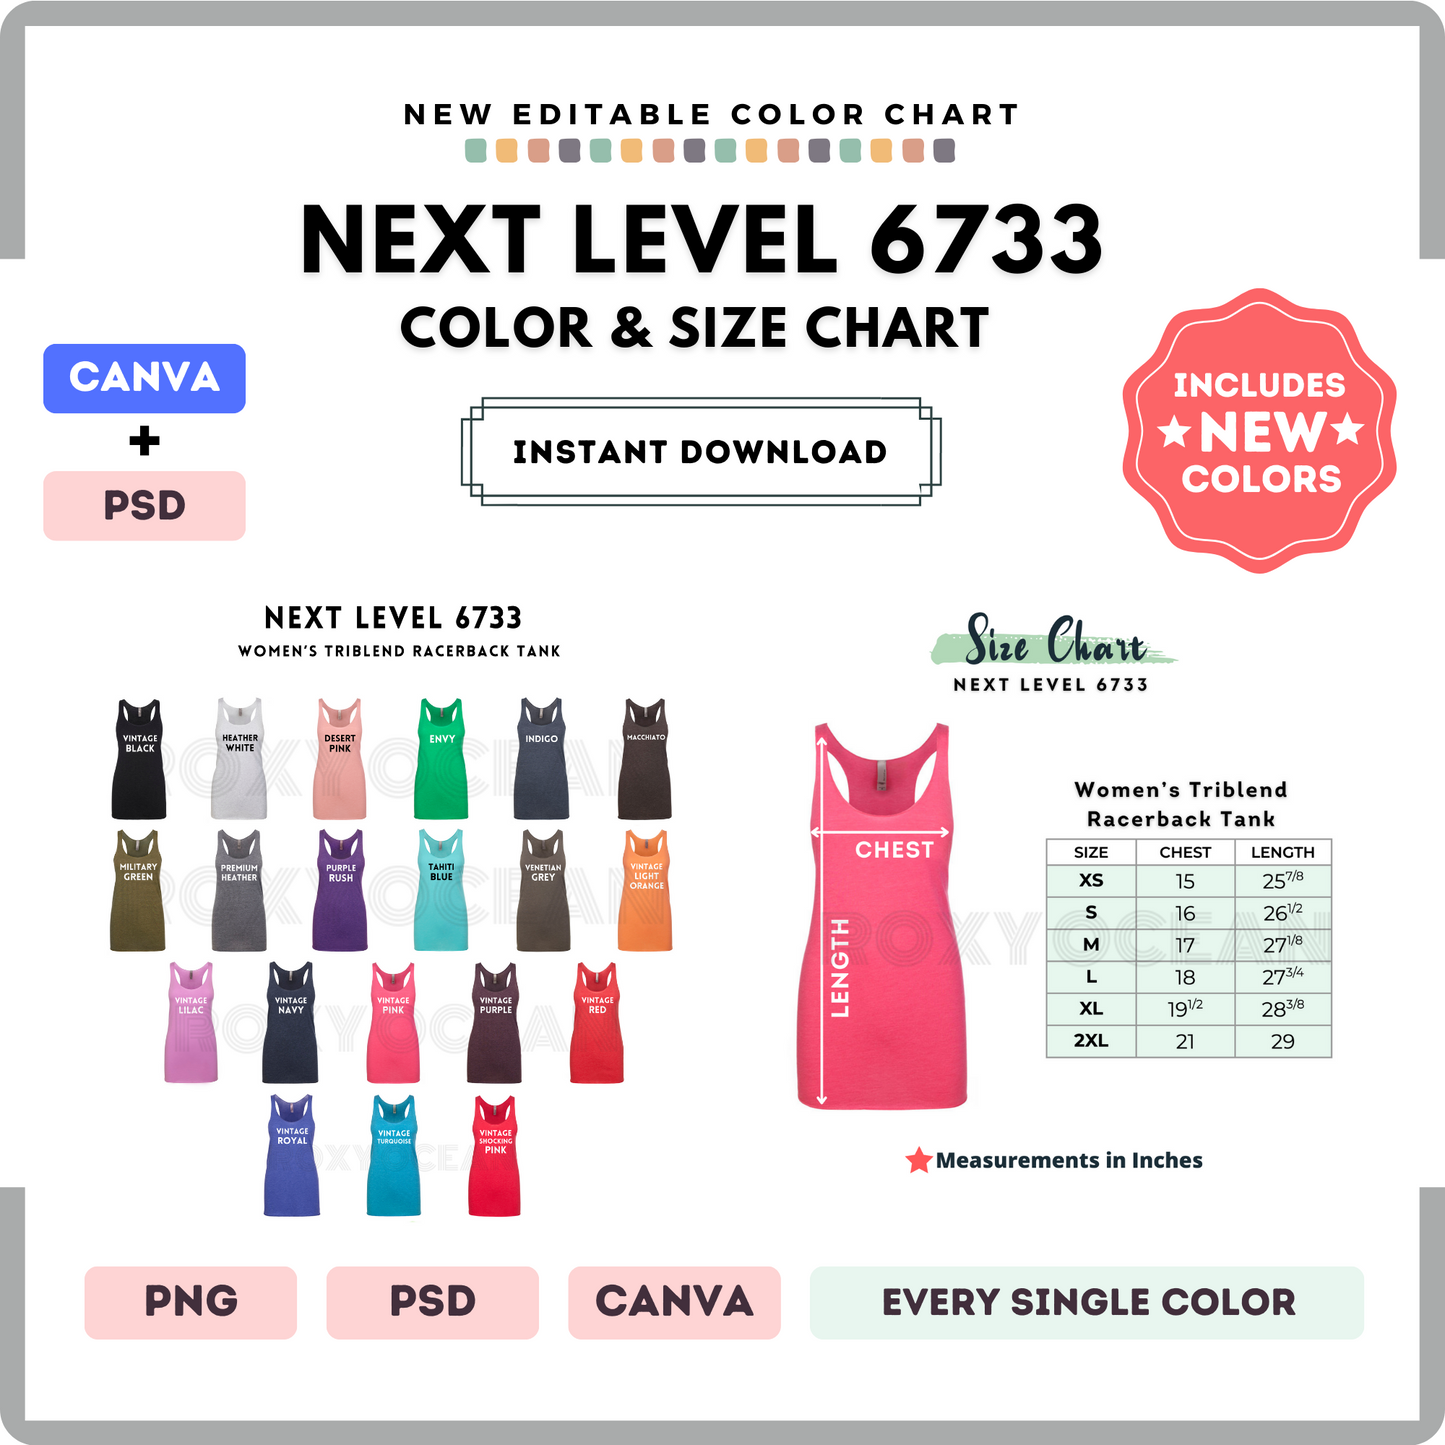 Next Level 6733 Color and Size Chart